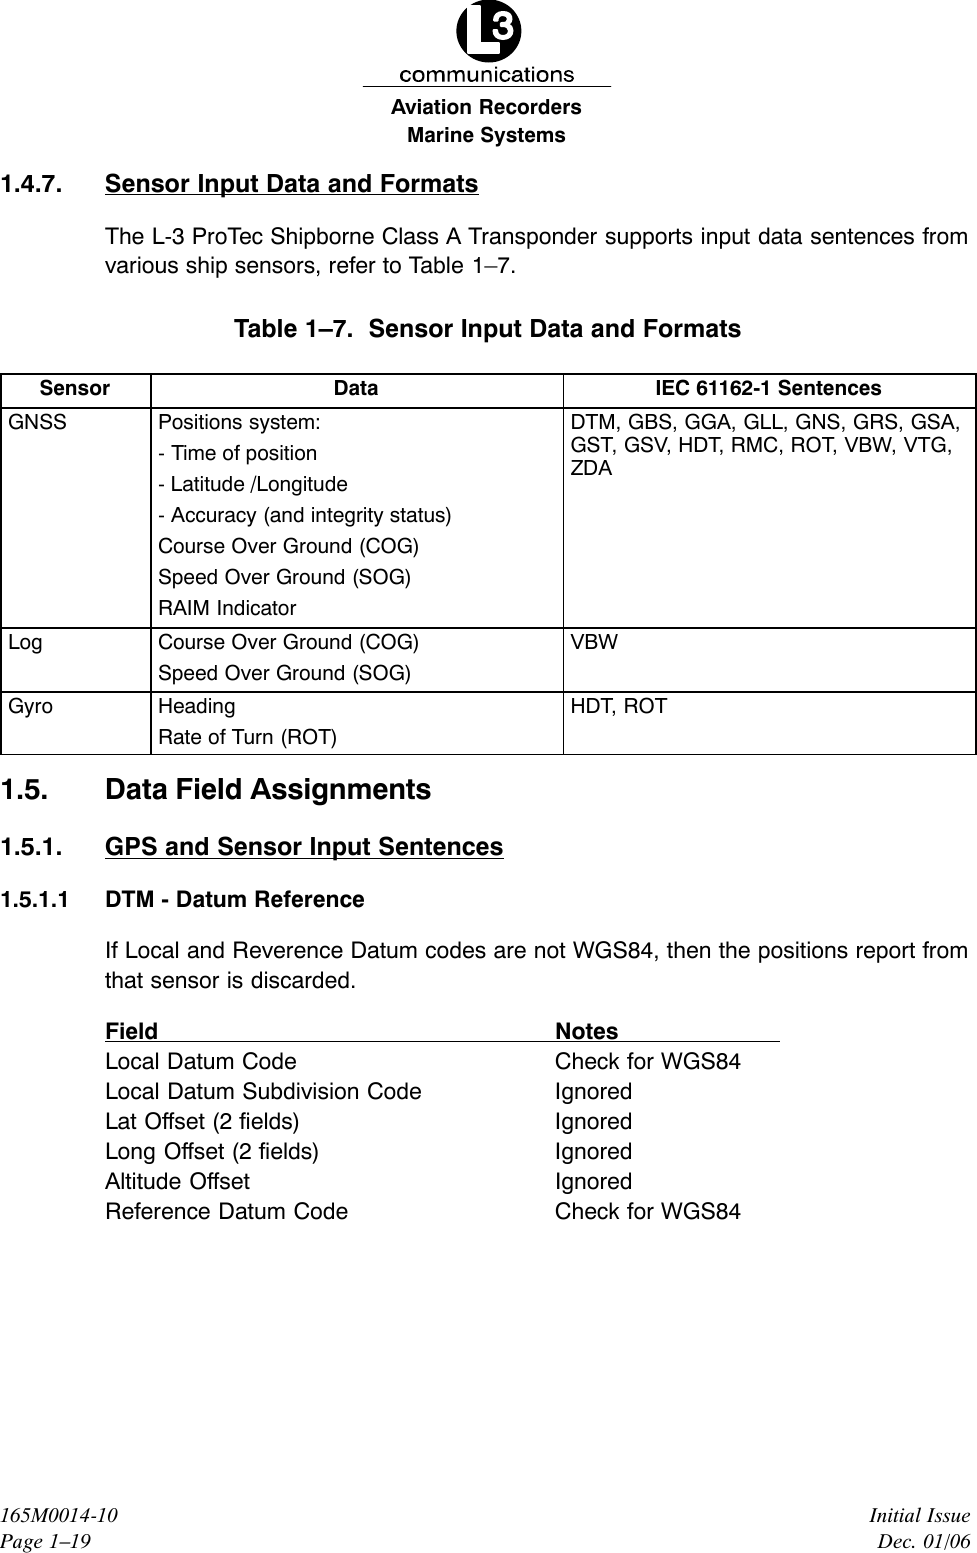 Marine SystemsAviation RecordersInitial IssueDec. 01/06165M0014-10Page 1–191.4.7. Sensor Input Data and FormatsThe L-3 ProTec Shipborne Class A Transponder supports input data sentences fromvarious ship sensors, refer to Table 1–7.Table 1–7.  Sensor Input Data and FormatsSensor Data IEC 61162-1 SentencesGNSS Positions system:- Time of position- Latitude /Longitude- Accuracy (and integrity status)Course Over Ground (COG)Speed Over Ground (SOG)RAIM IndicatorDTM, GBS, GGA, GLL, GNS, GRS, GSA,GST, GSV, HDT, RMC, ROT, VBW, VTG,ZDALog Course Over Ground (COG)Speed Over Ground (SOG)VBWGyro HeadingRate of Turn (ROT)HDT, ROT1.5. Data Field Assignments1.5.1. GPS and Sensor Input Sentences1.5.1.1 DTM - Datum ReferenceIf Local and Reverence Datum codes are not WGS84, then the positions report fromthat sensor is discarded.Field NotesLocal Datum Code Check for WGS84Local Datum Subdivision Code IgnoredLat Offset (2 fields) IgnoredLong Offset (2 fields) IgnoredAltitude Offset IgnoredReference Datum Code Check for WGS84